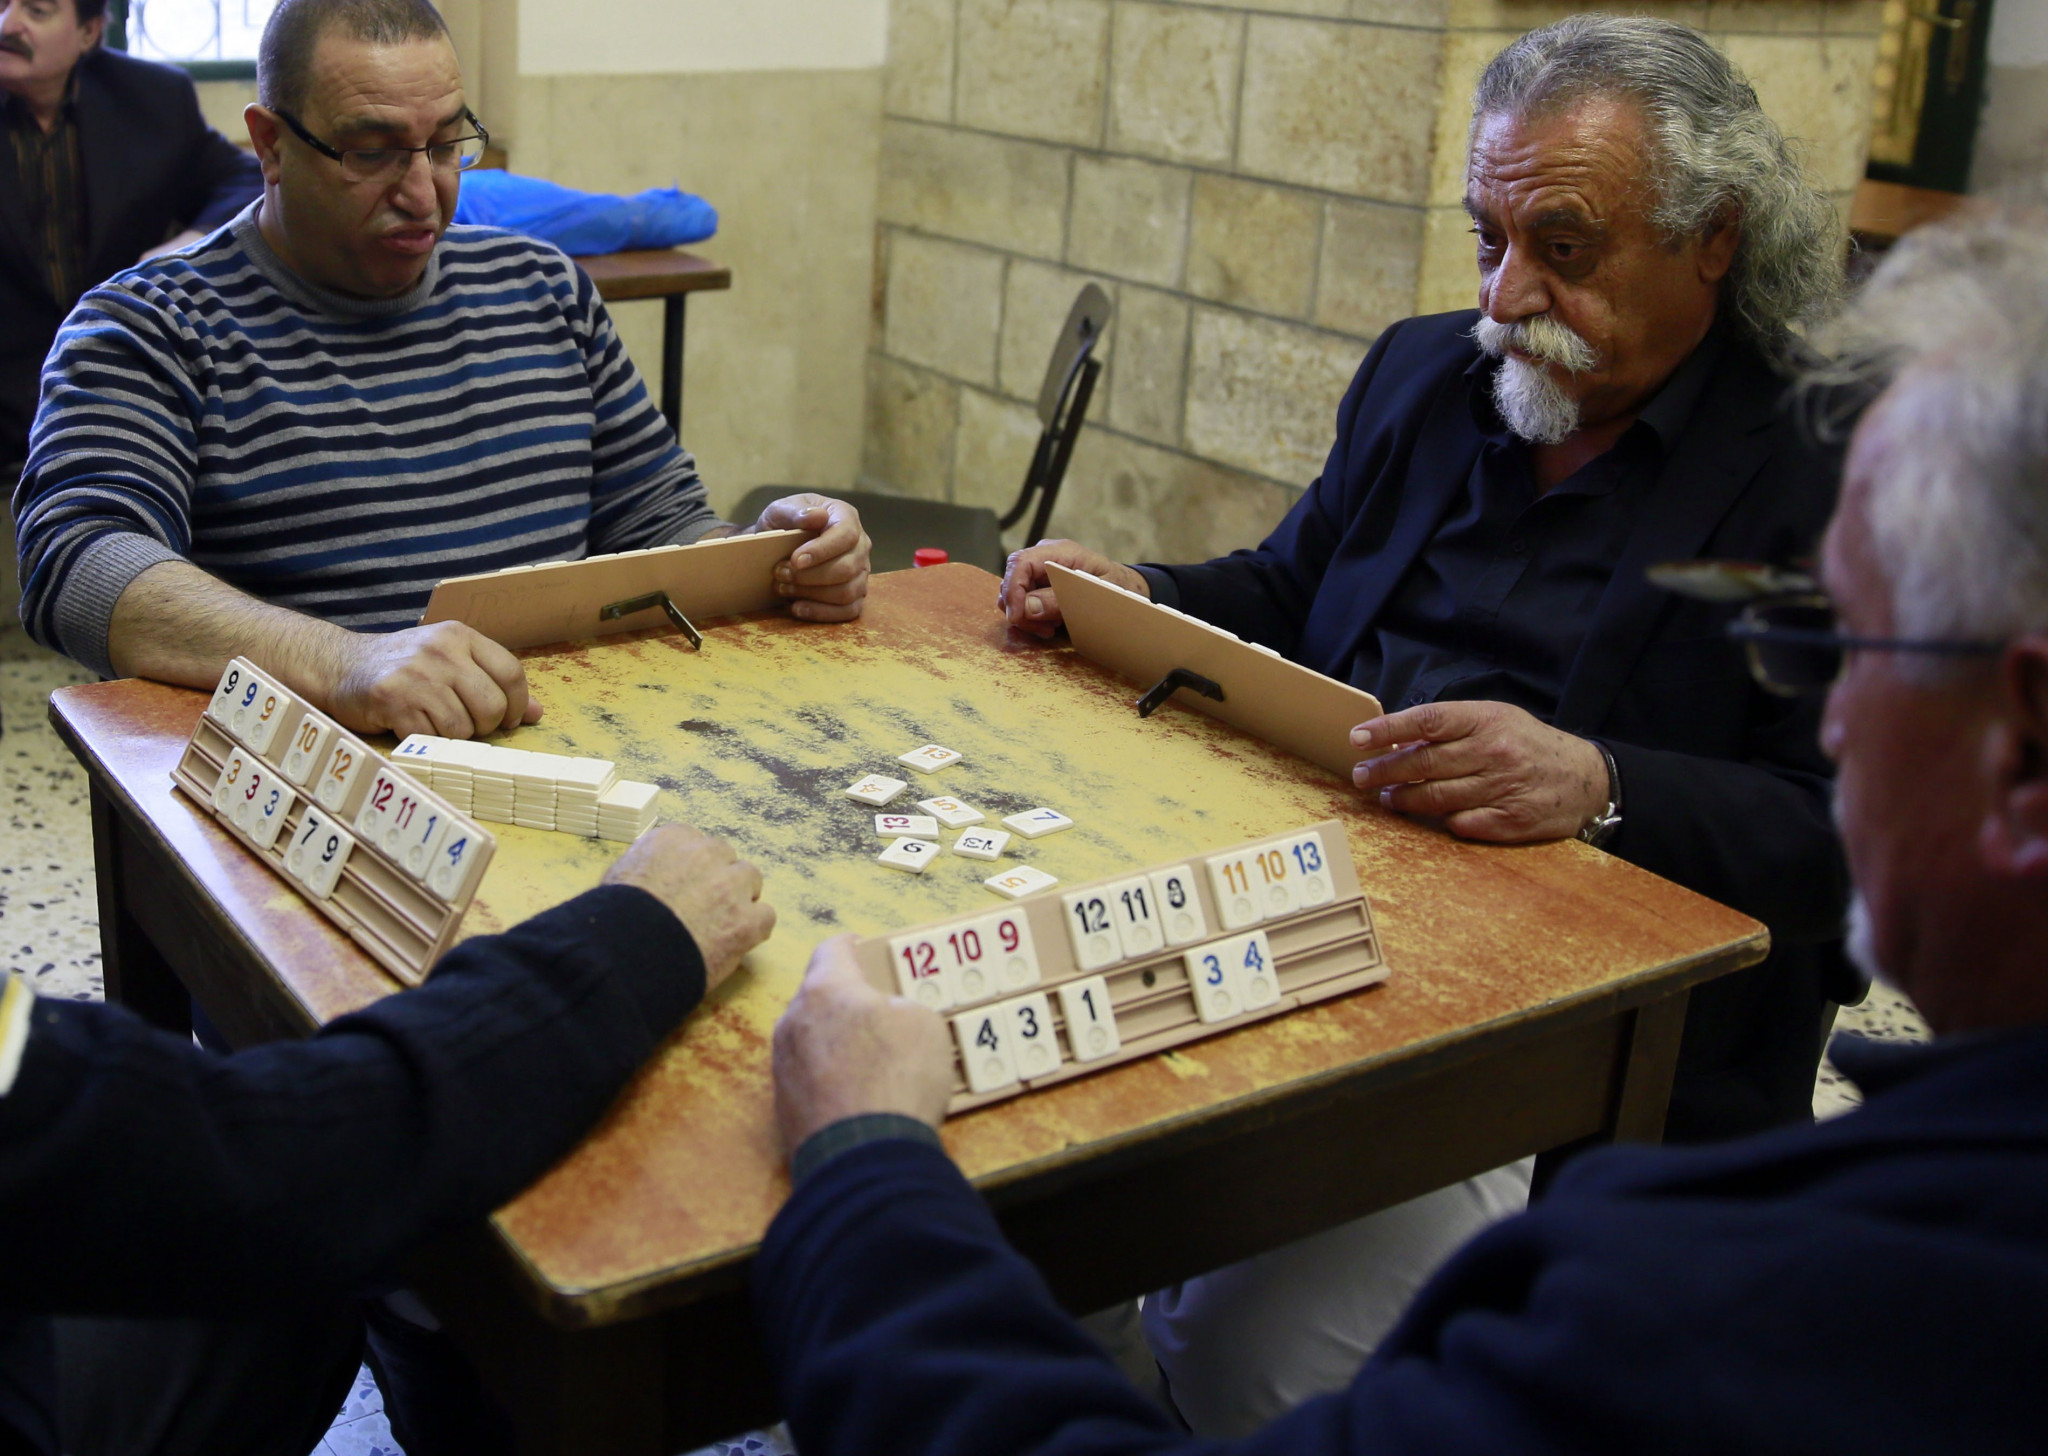 Rummikub has been suggested as an activity for the elderly ©Getty Images